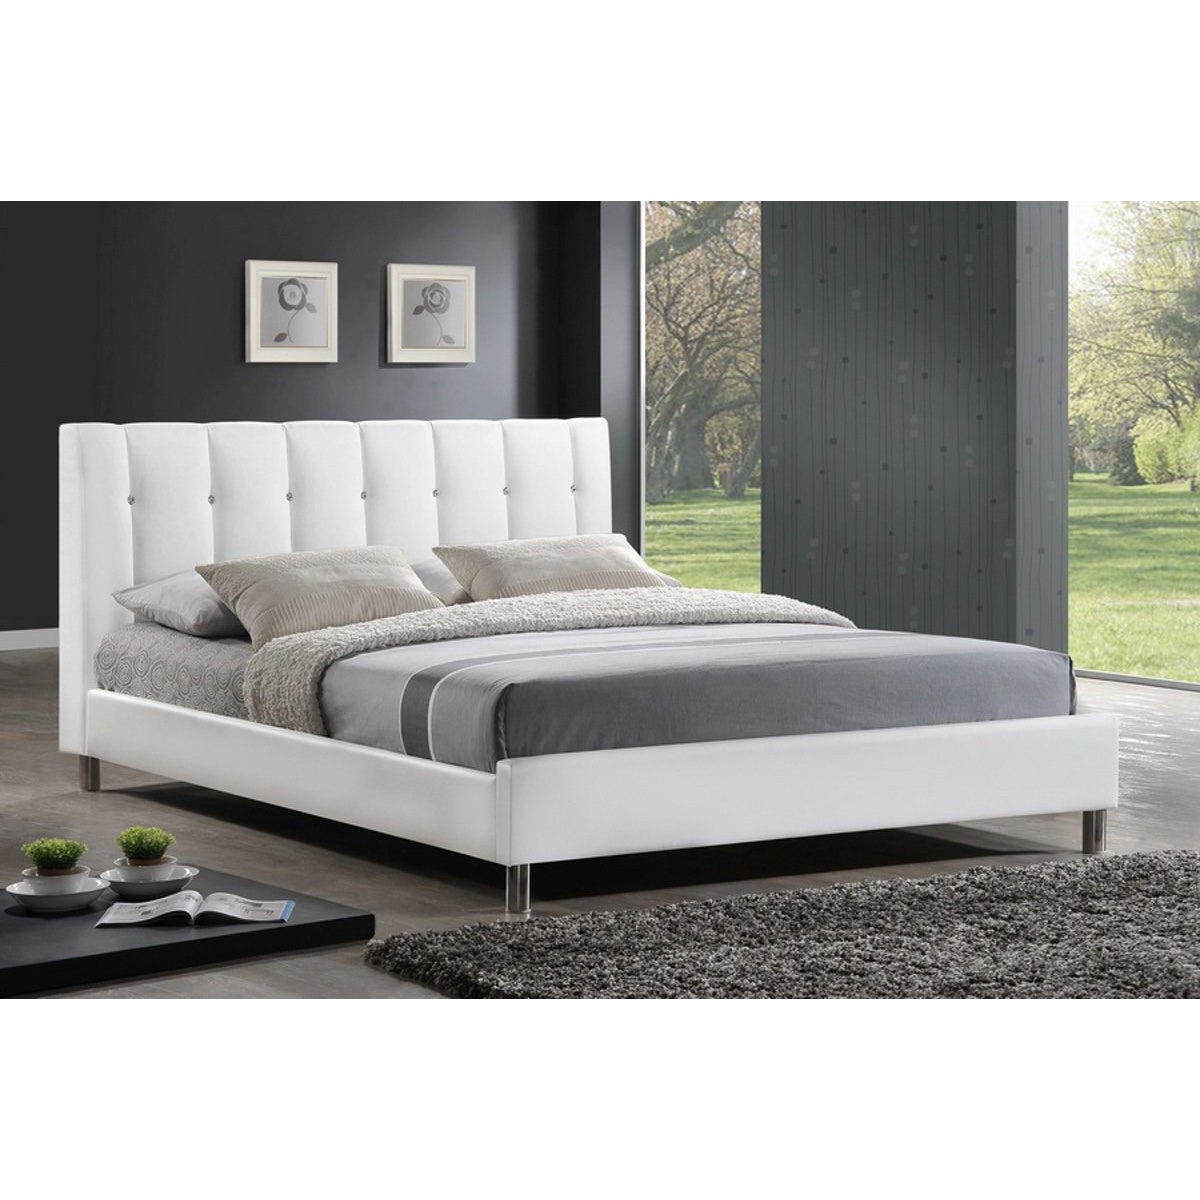 Baxton Studio Vino White Modern Bed with Upholstered Headboard - Full Size  Baxton Studio-beds-Minimal And Modern - 1